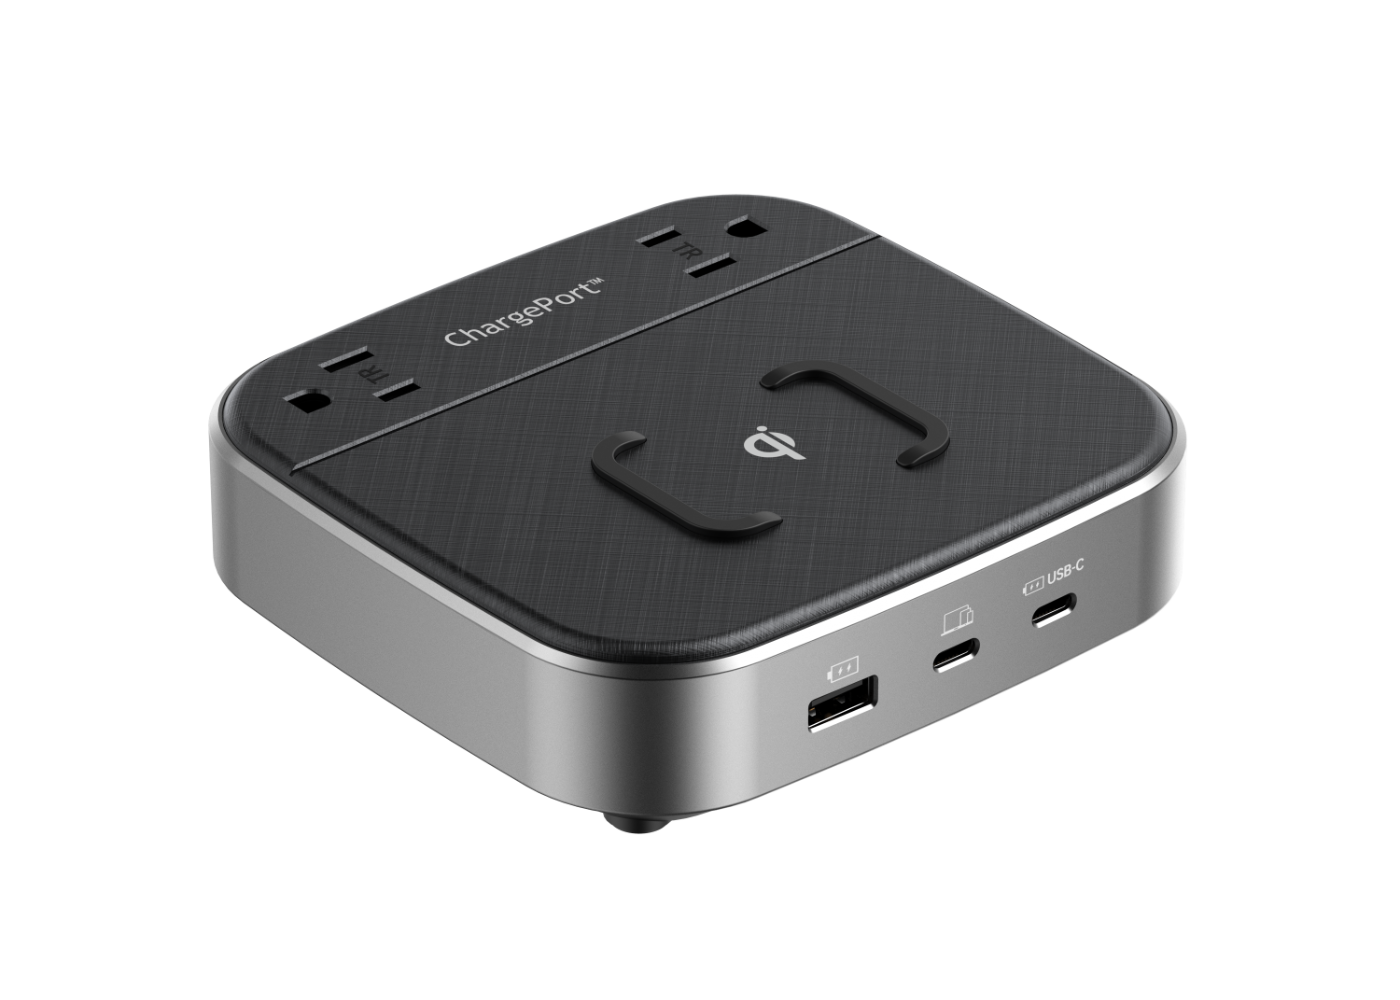 ChargePort Pro